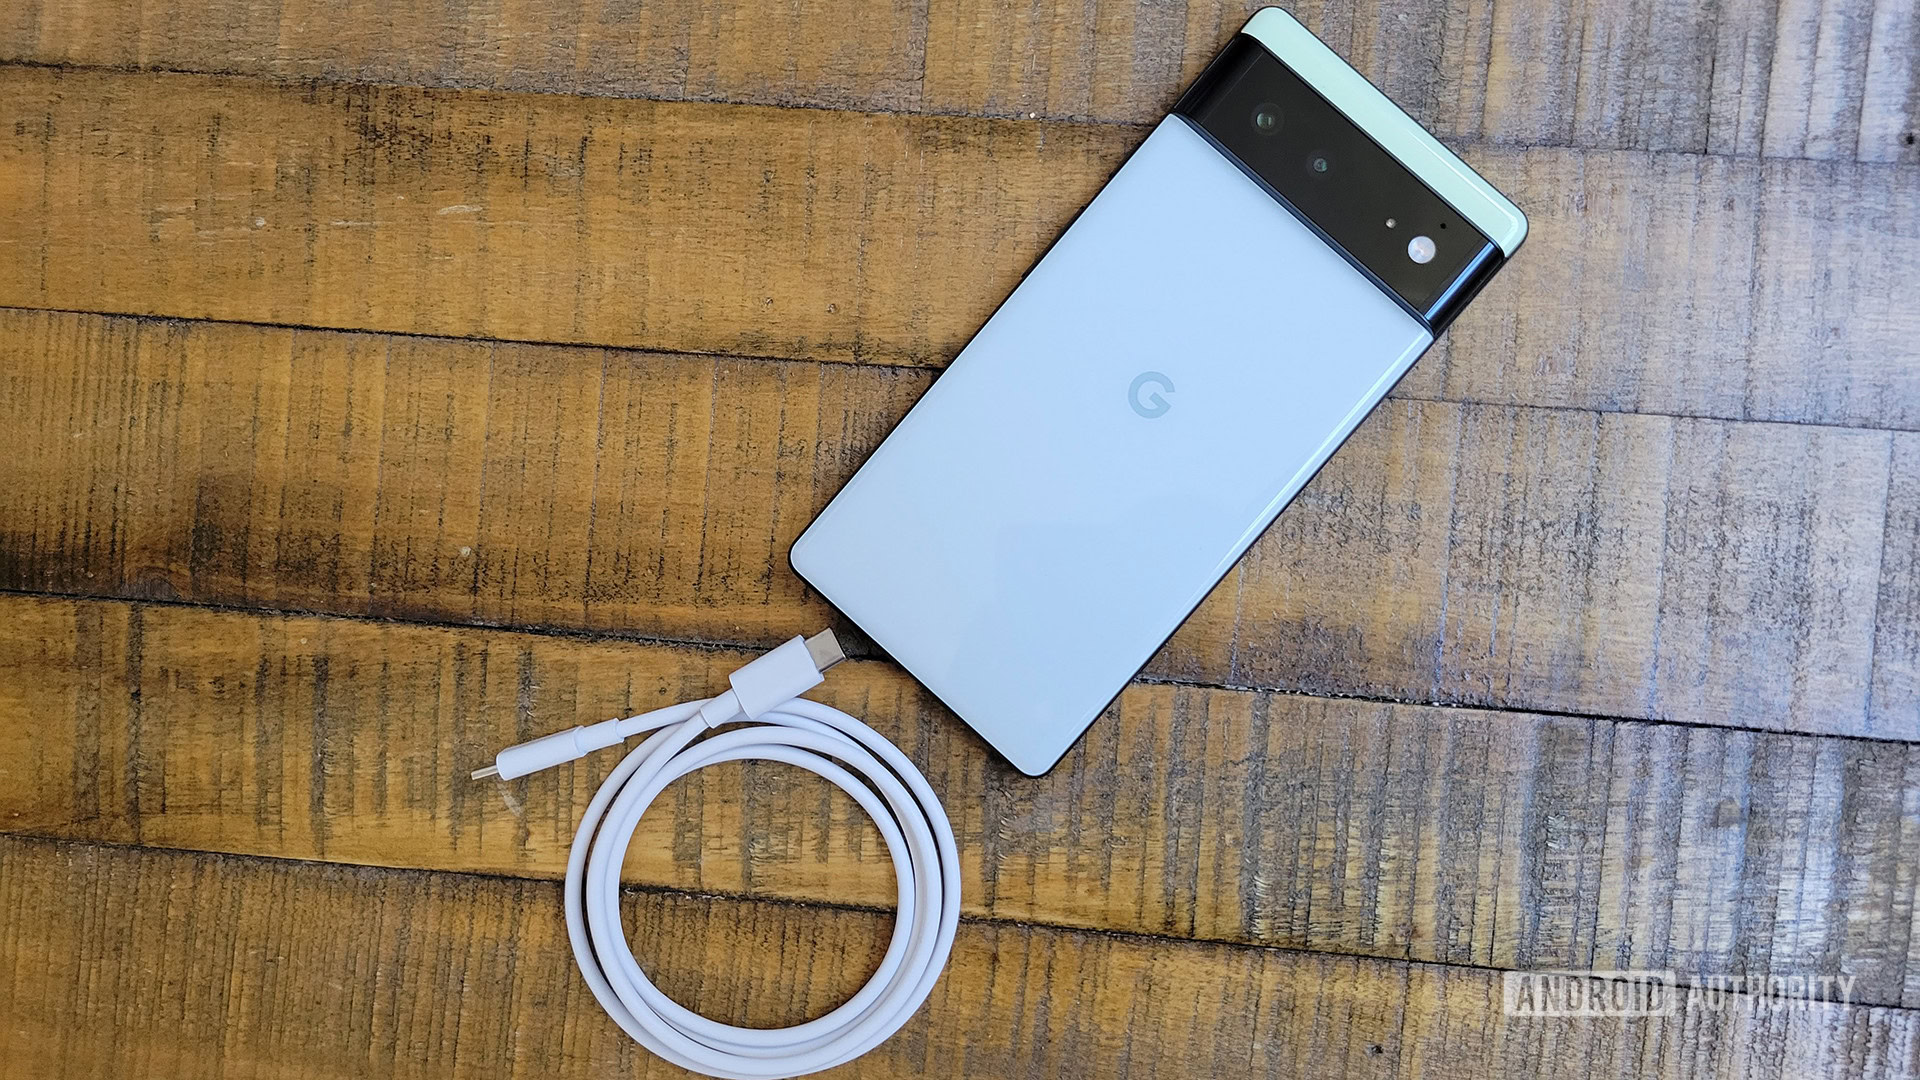 Google Pixel 6 with USB C cable